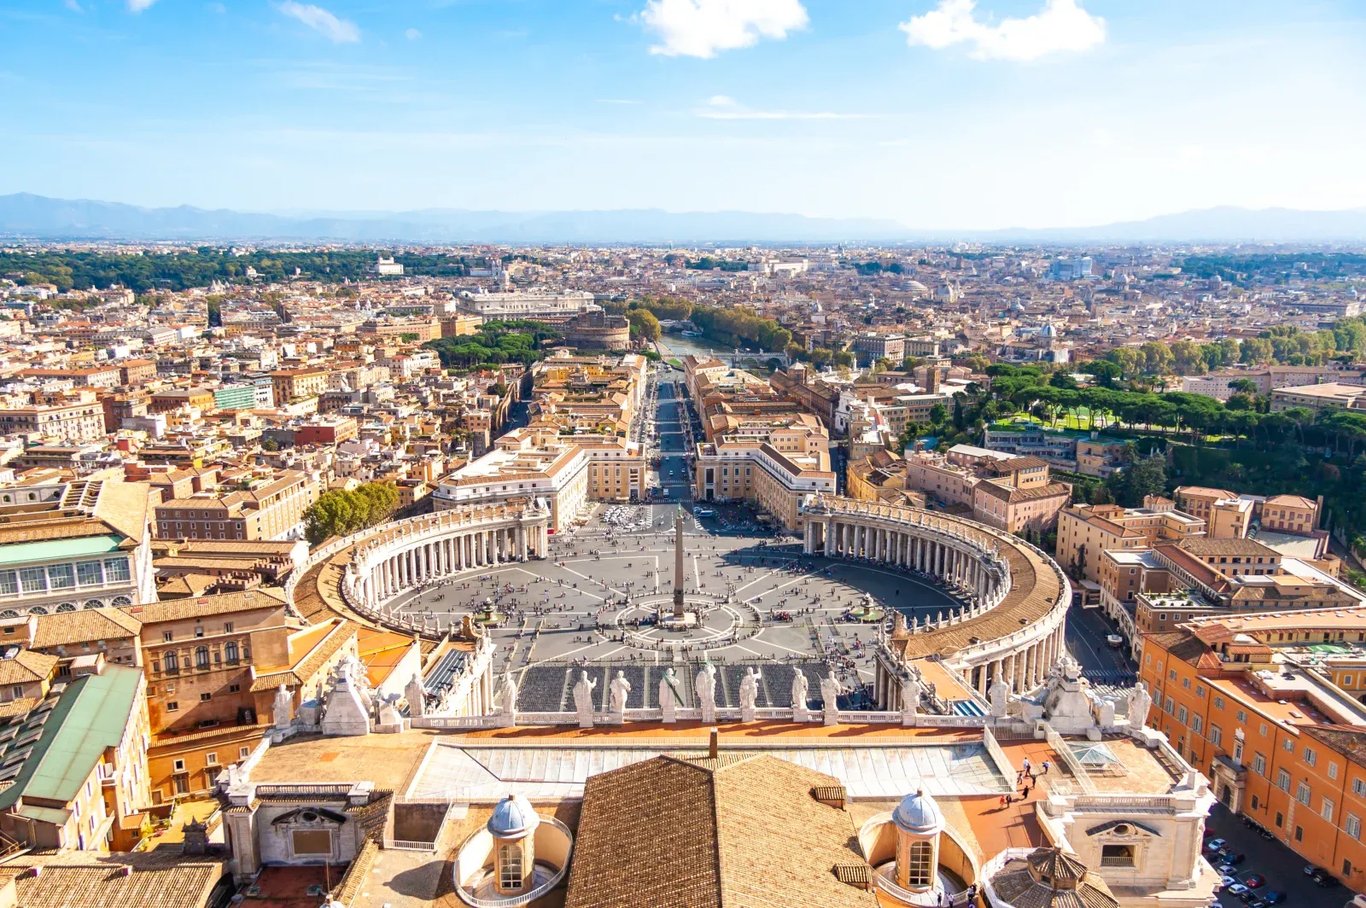 Vatican City - Top 13 Attractions (with a map)